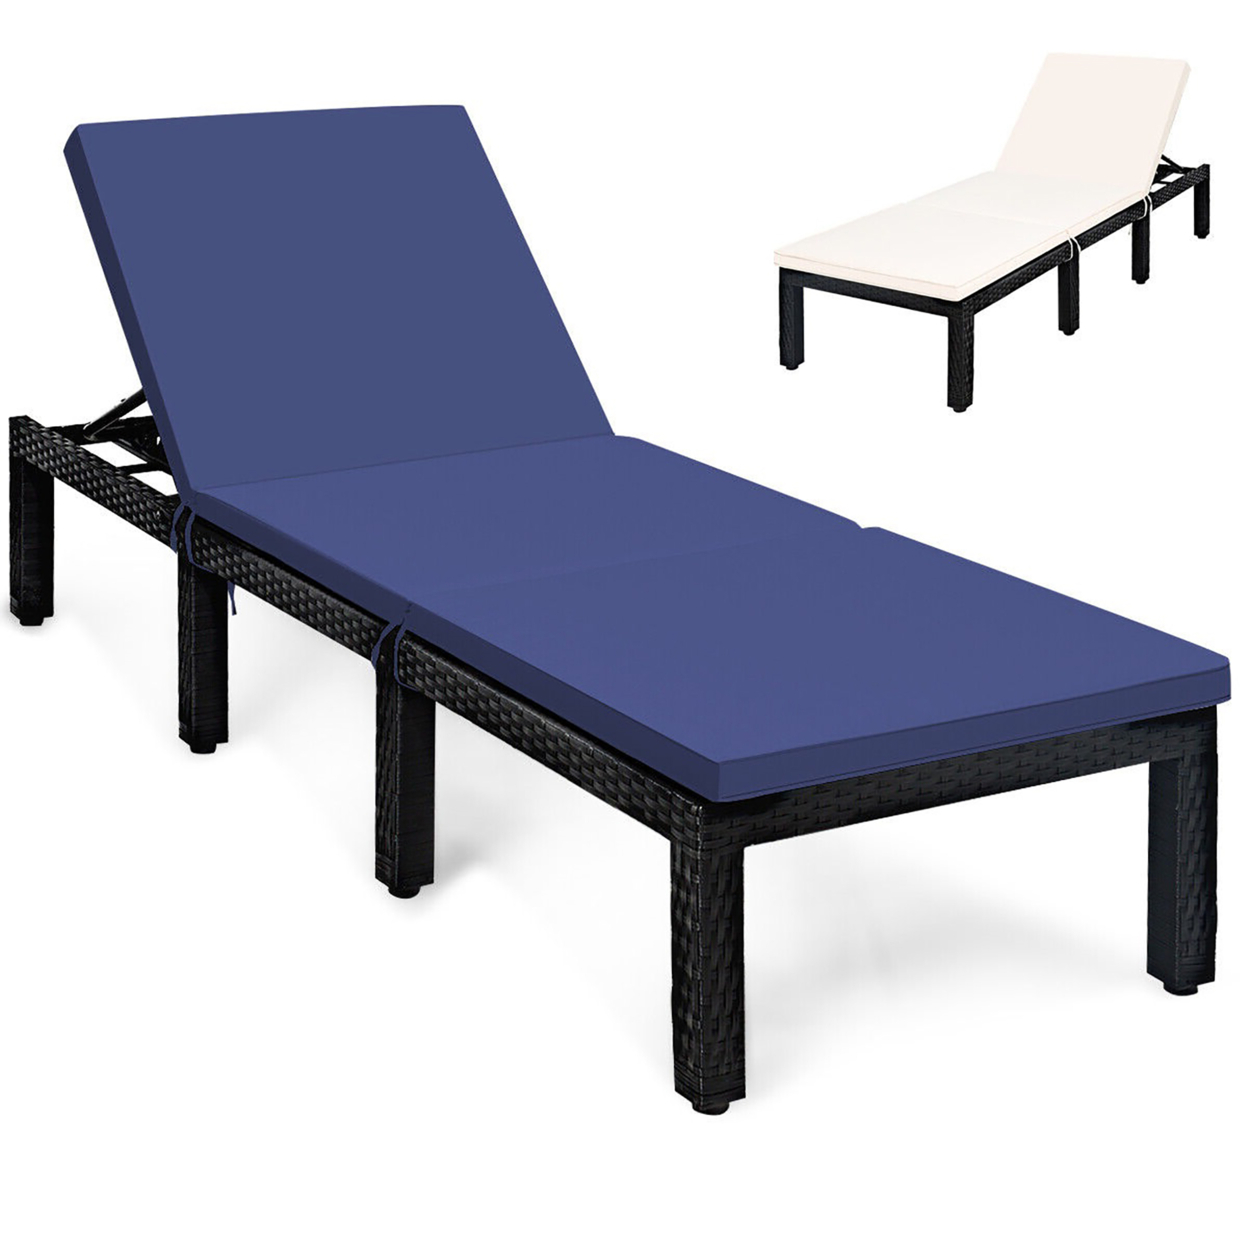 Patio Lounge Chair Rattan Chaise W/ Adjustable Navy/Red & Off White Cushioned - Navy/Off White